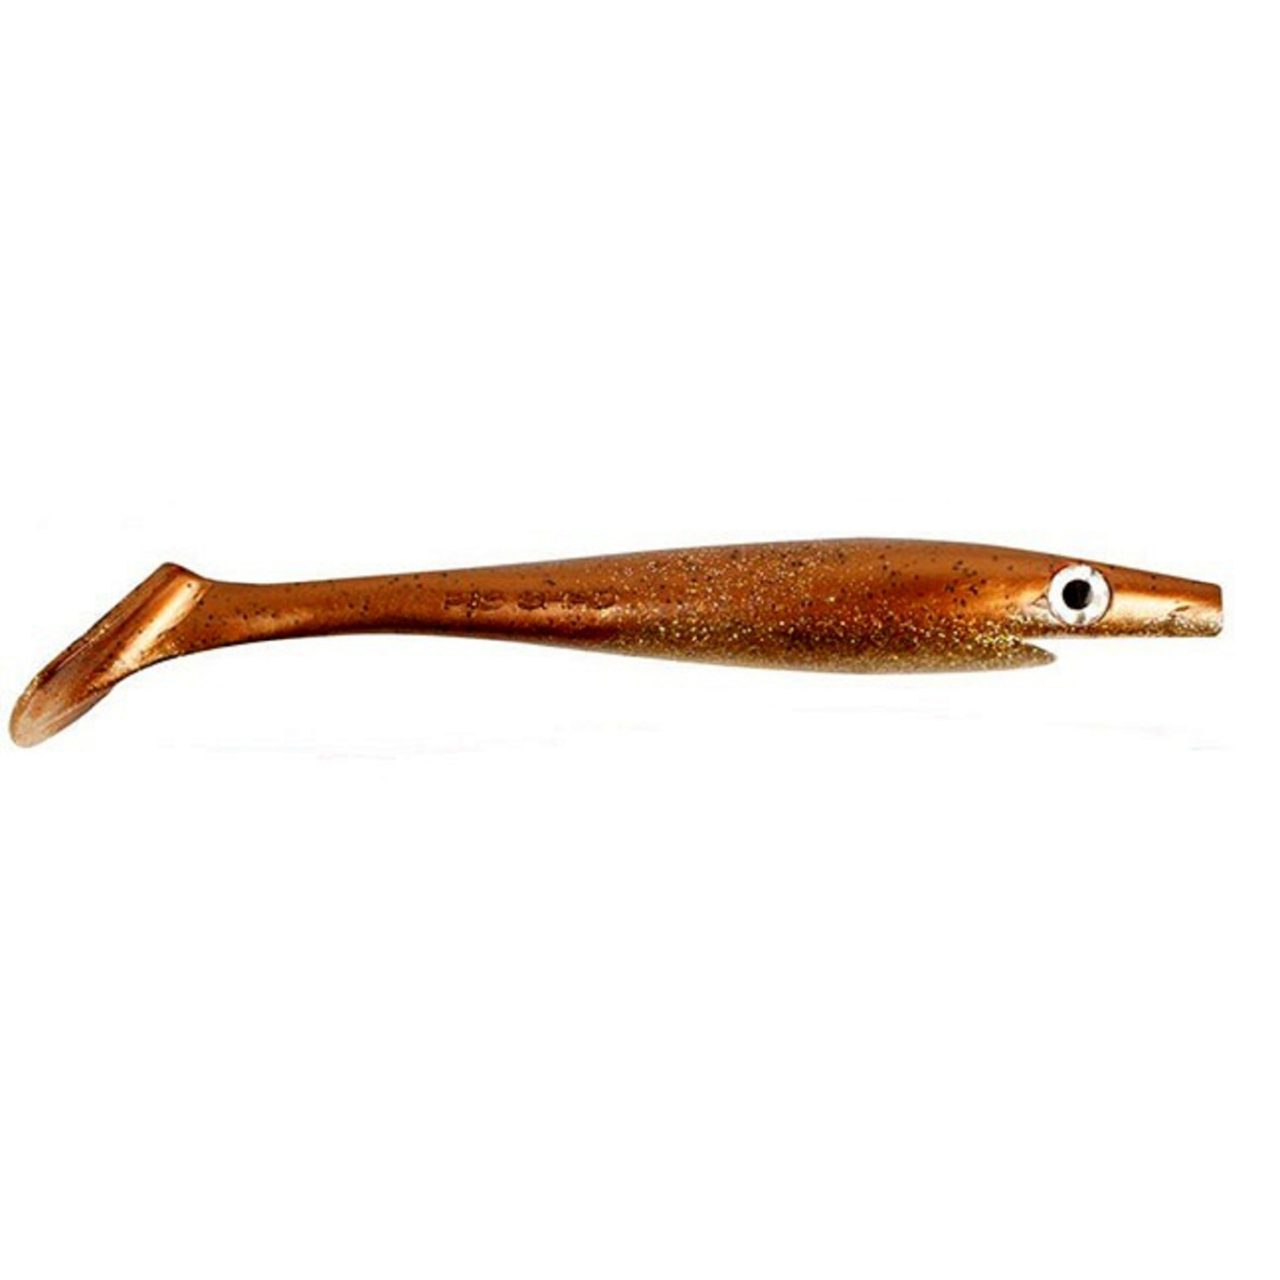 The Pig Shad #103 Copper Minnow